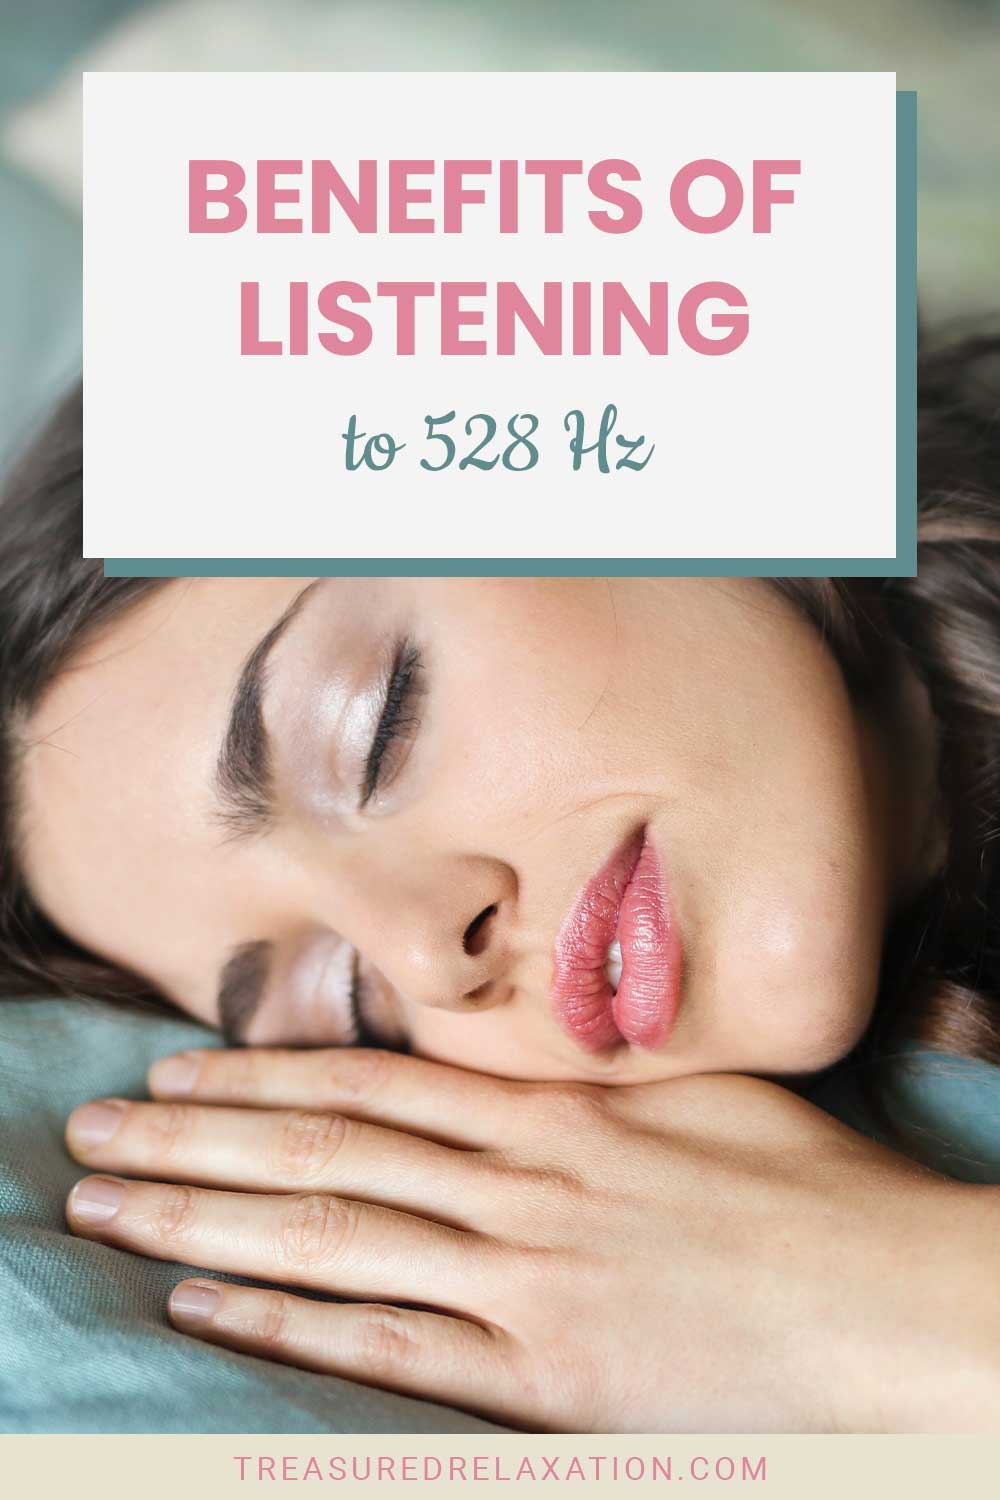 Woman lying with her eyes closed - Benefits of Listening to 528 Hz